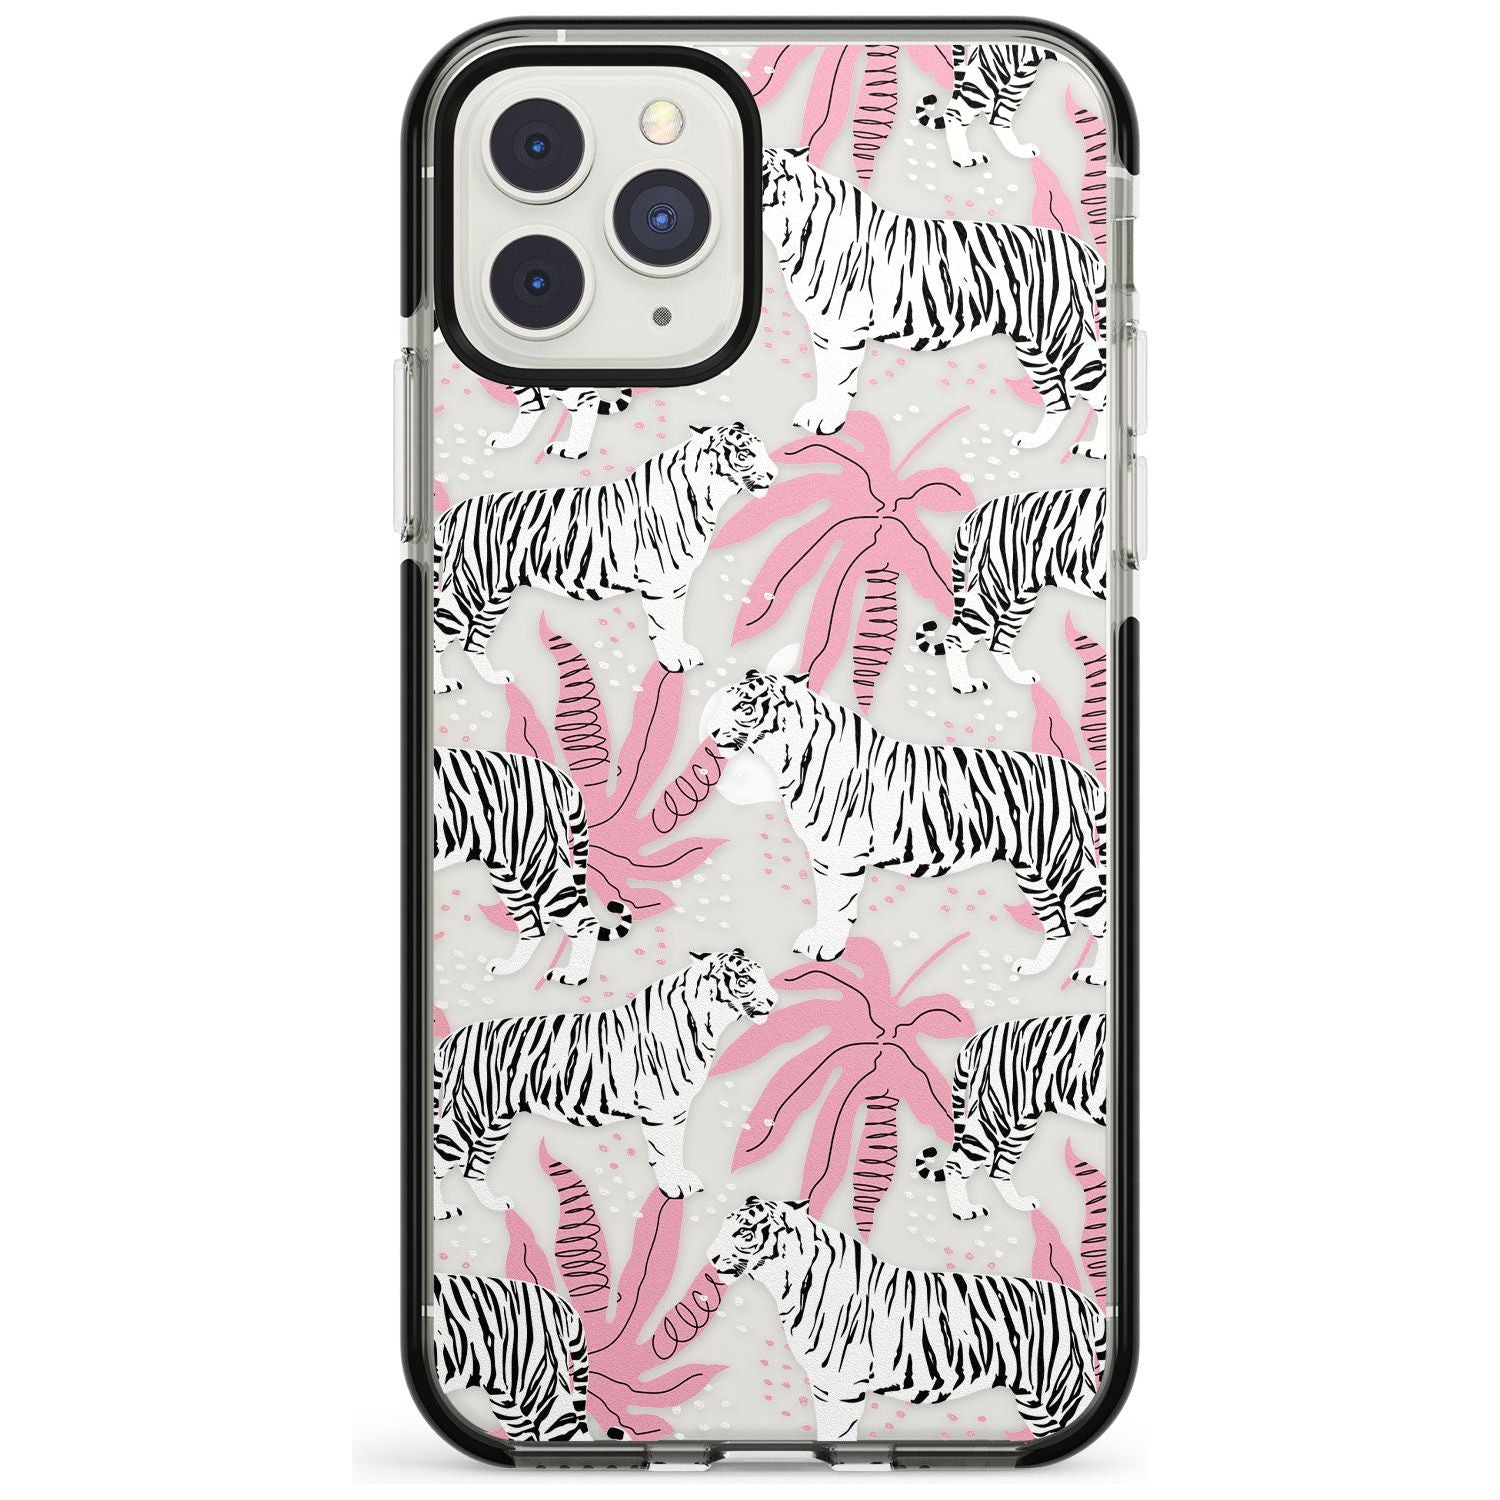 Tigers Within Black Impact Phone Case for iPhone 11 Pro Max